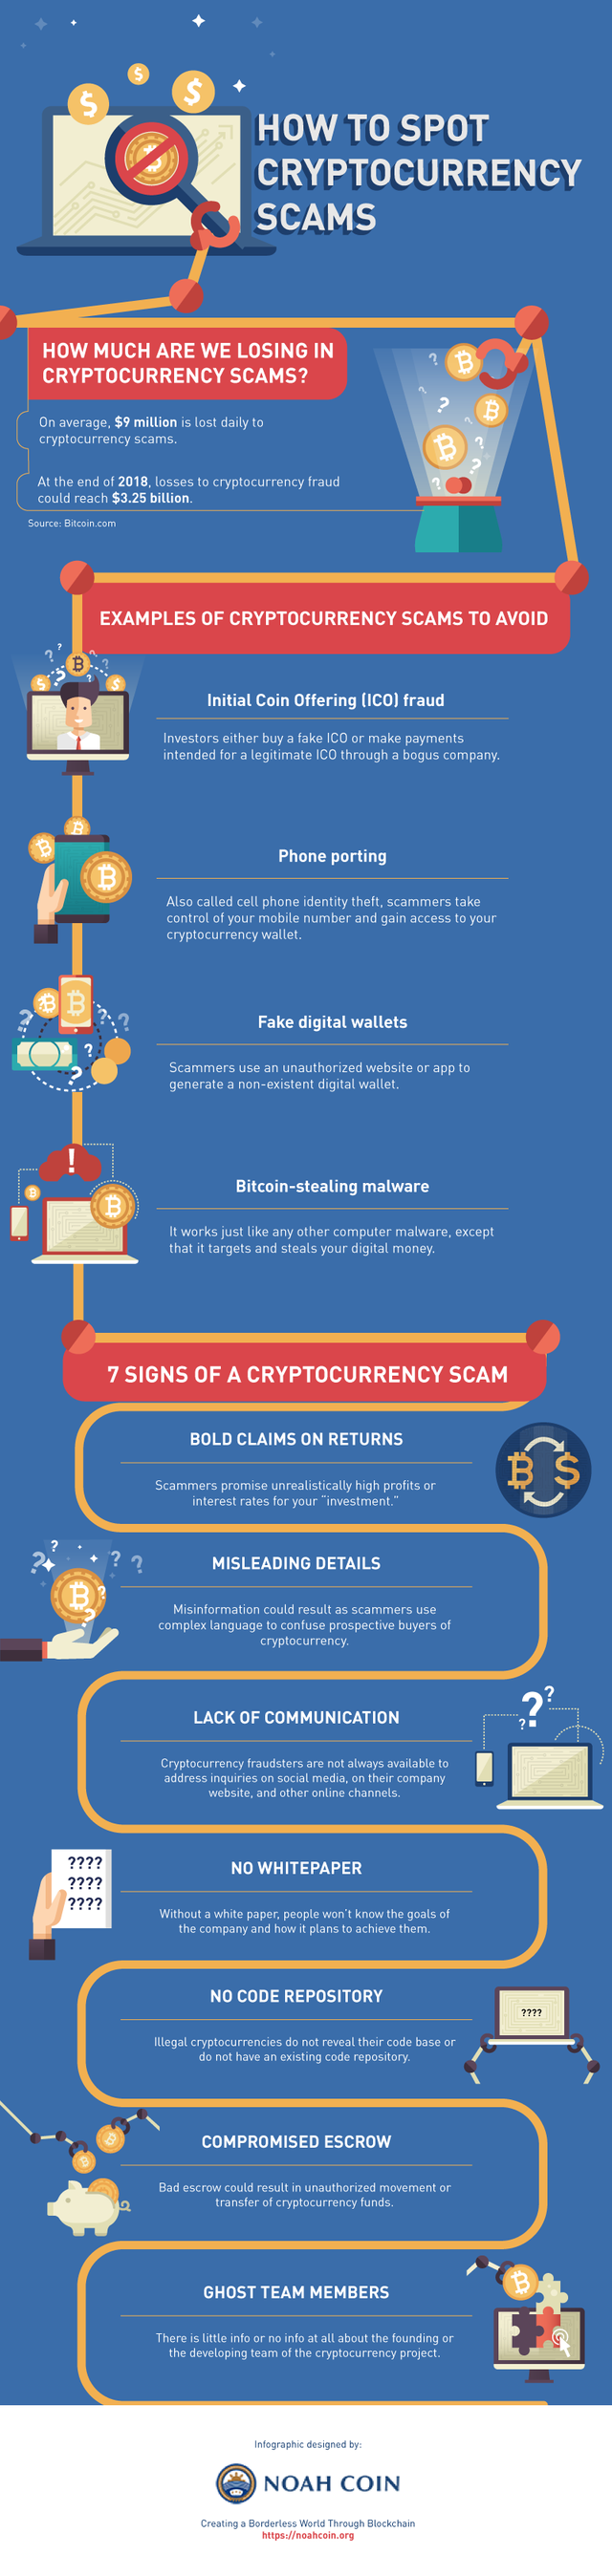 How to Spot Cryptocurrency Scams (Infographic).png